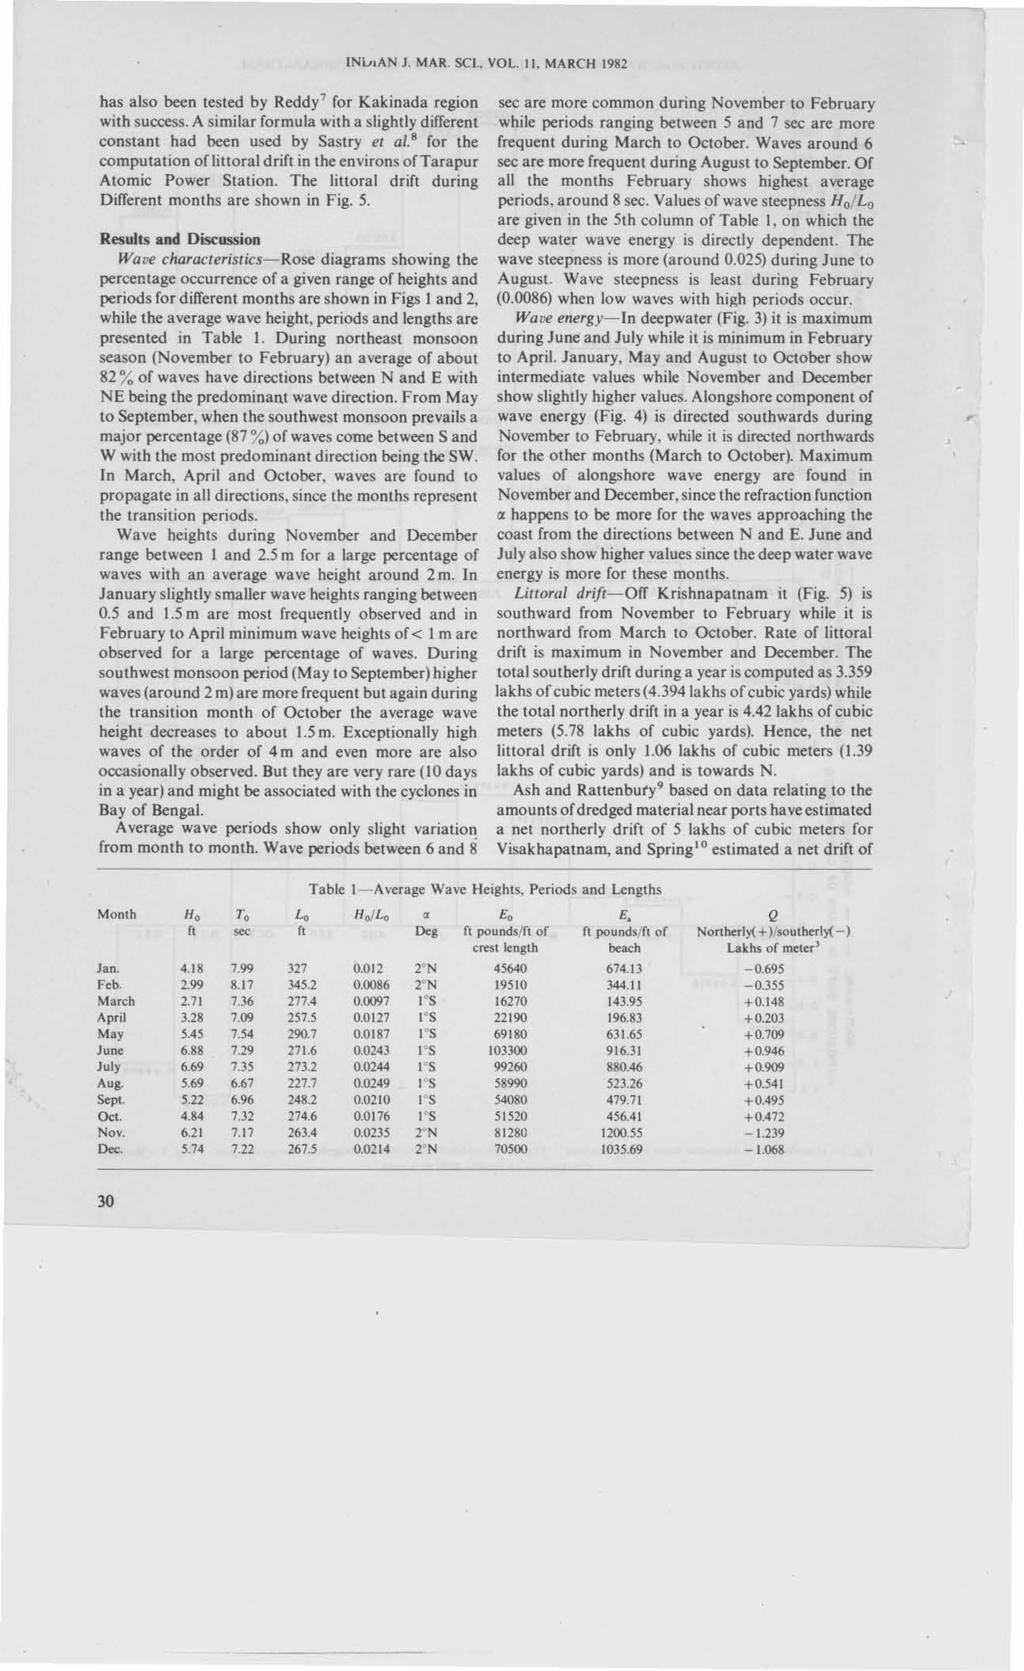 Il..nA J. MAR. SCI., VOL. II, MARCH 1982 has also been tested by Reddy 7 for Kakinada region with success. A similar formula with a slightly different constant had been used by Sastry et al.